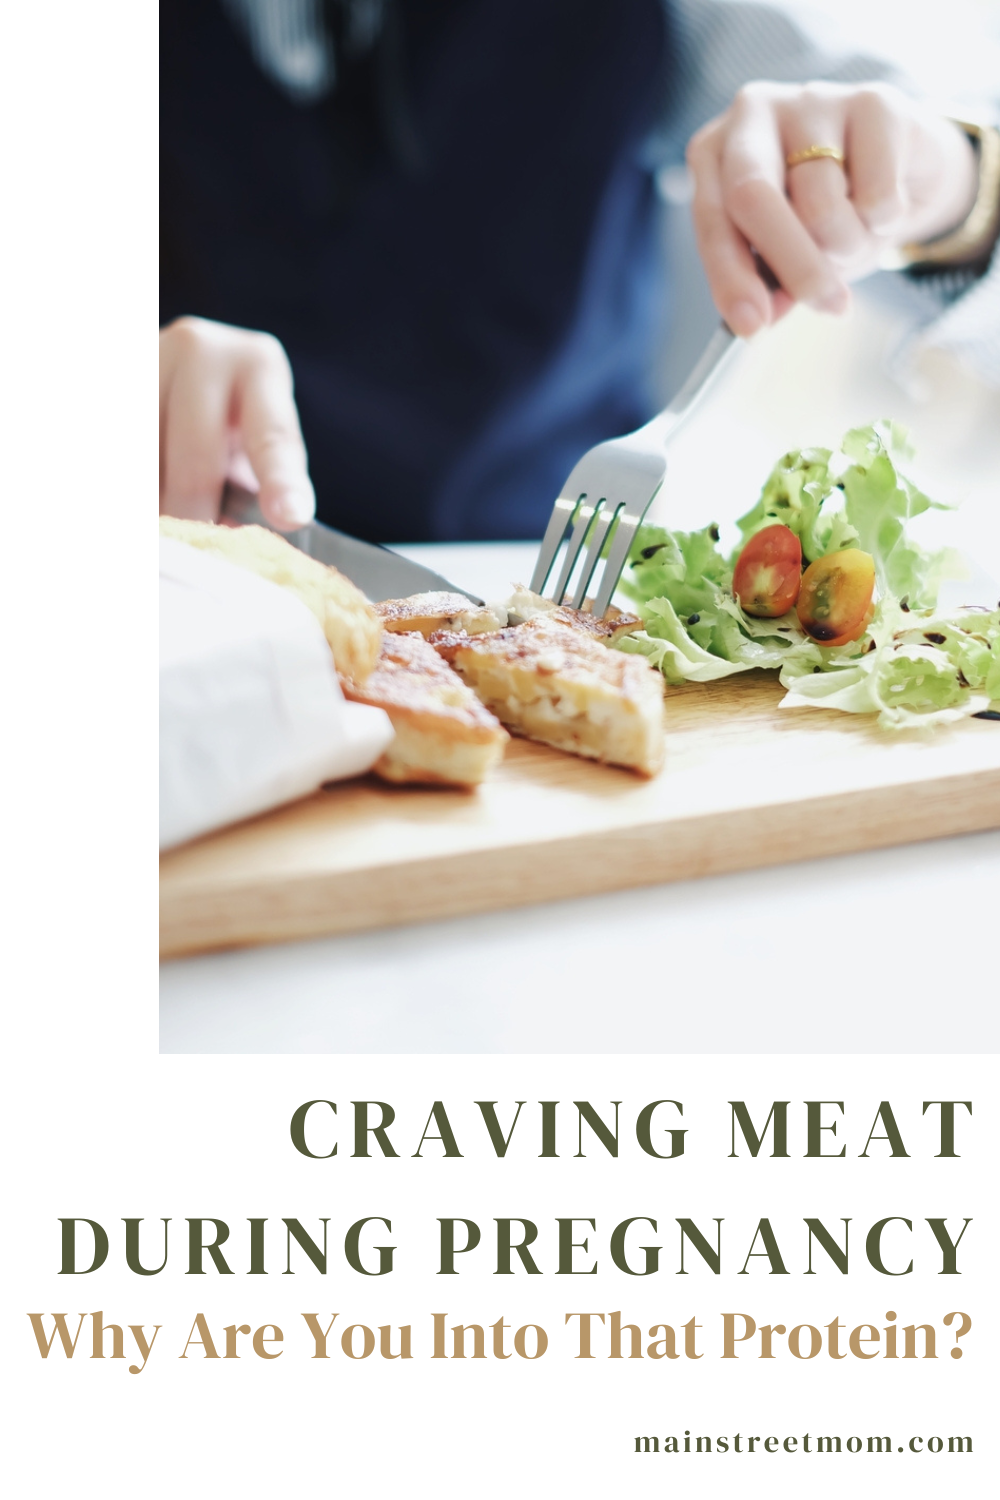 Craving Meat During Pregnancy: Why Are You Into That Protein?